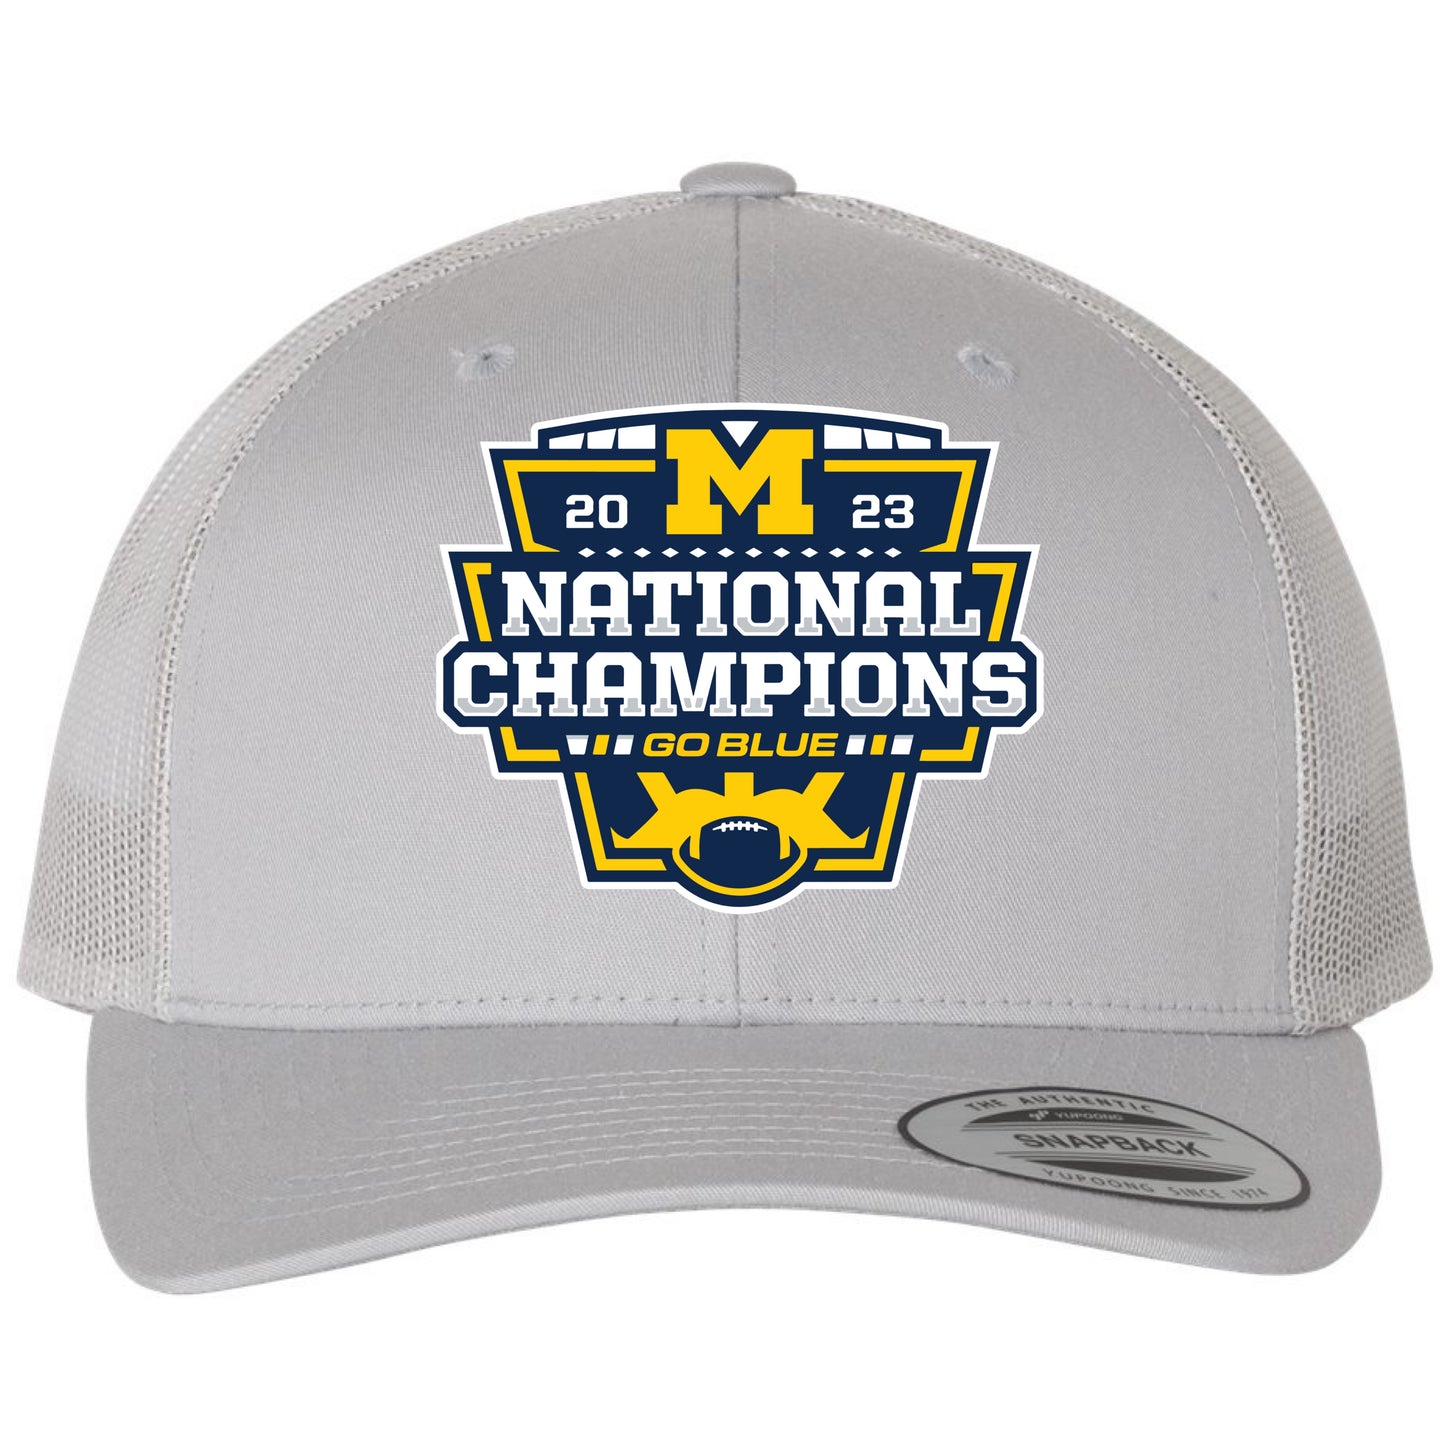 Michigan College Football Playoff 2023 National Champions 3D YP Snapback Trucker Hat- Silver - Ten Gallon Hat Co.